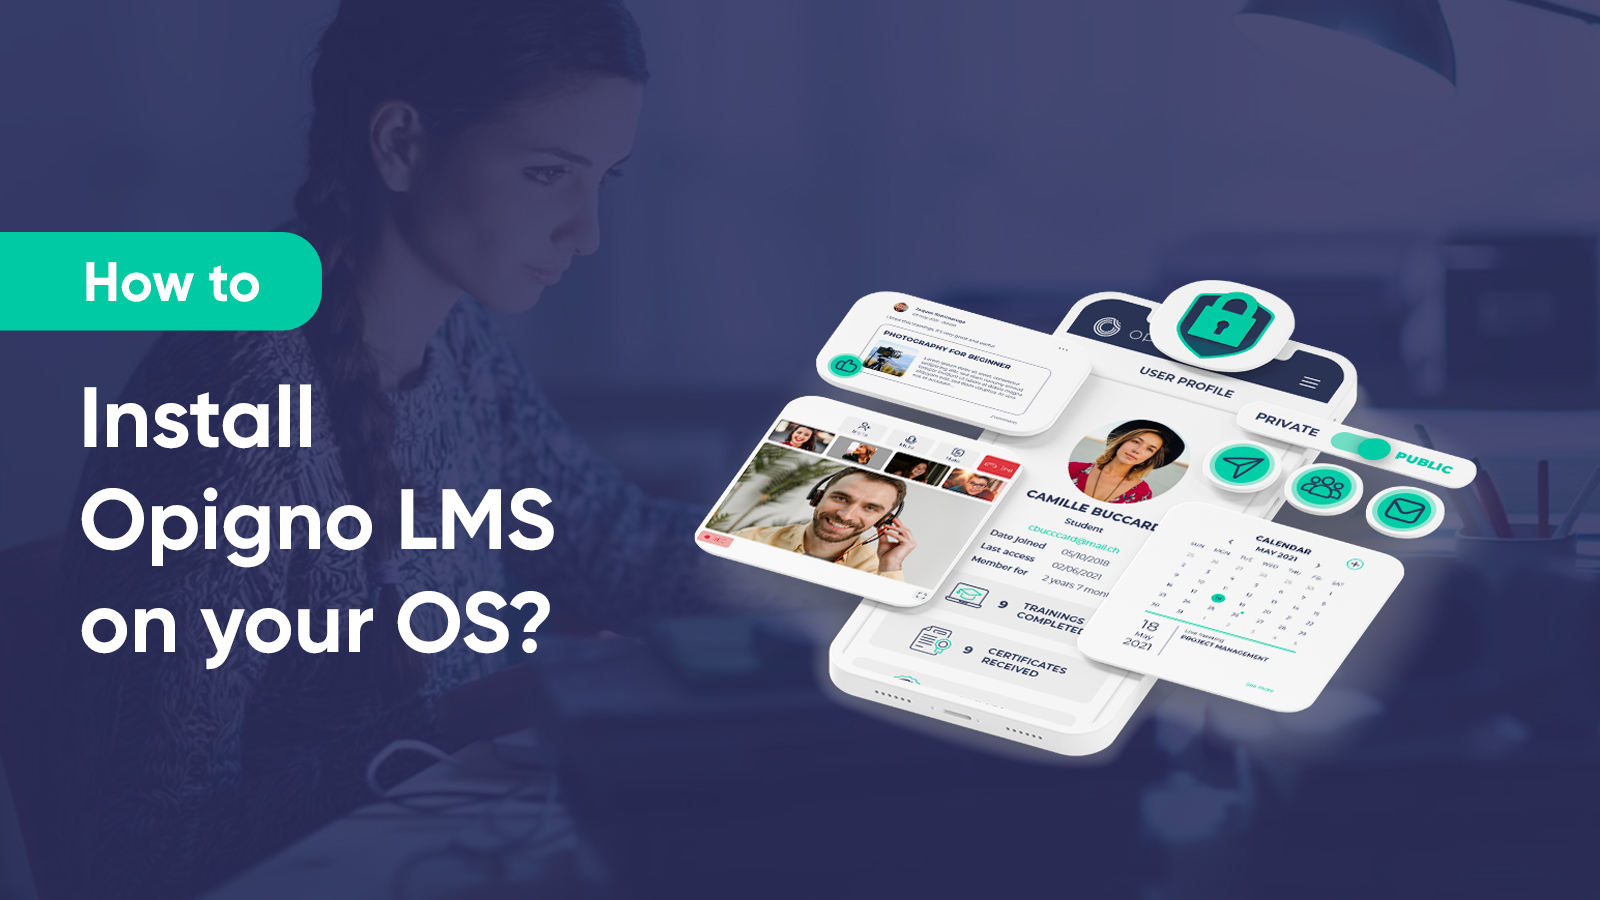 How to Install Opigno LMS